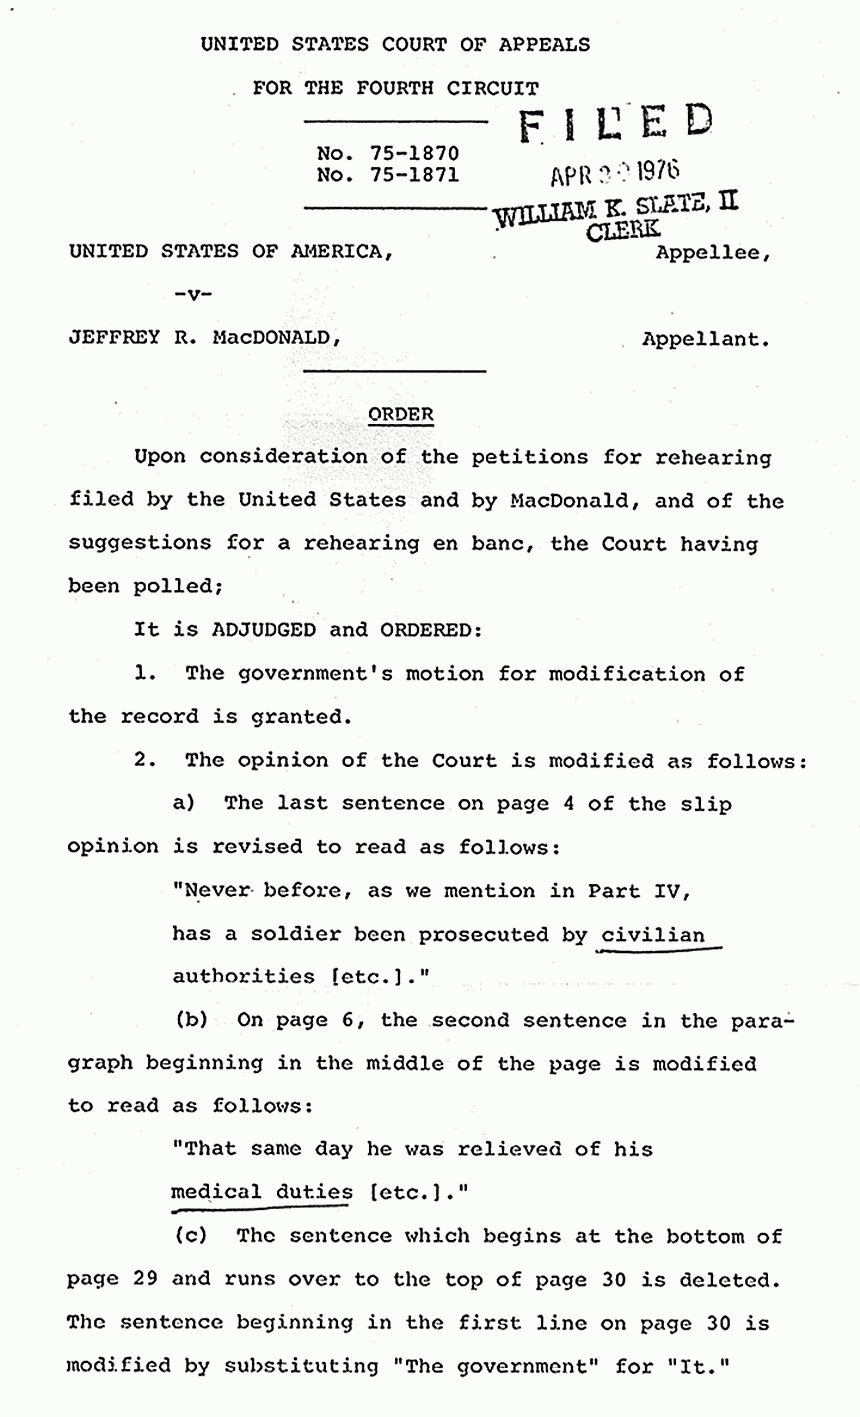 April 30, 1976: U. S. Court of Appeals for the Fourth Circuit; Order, p. 1 of 2